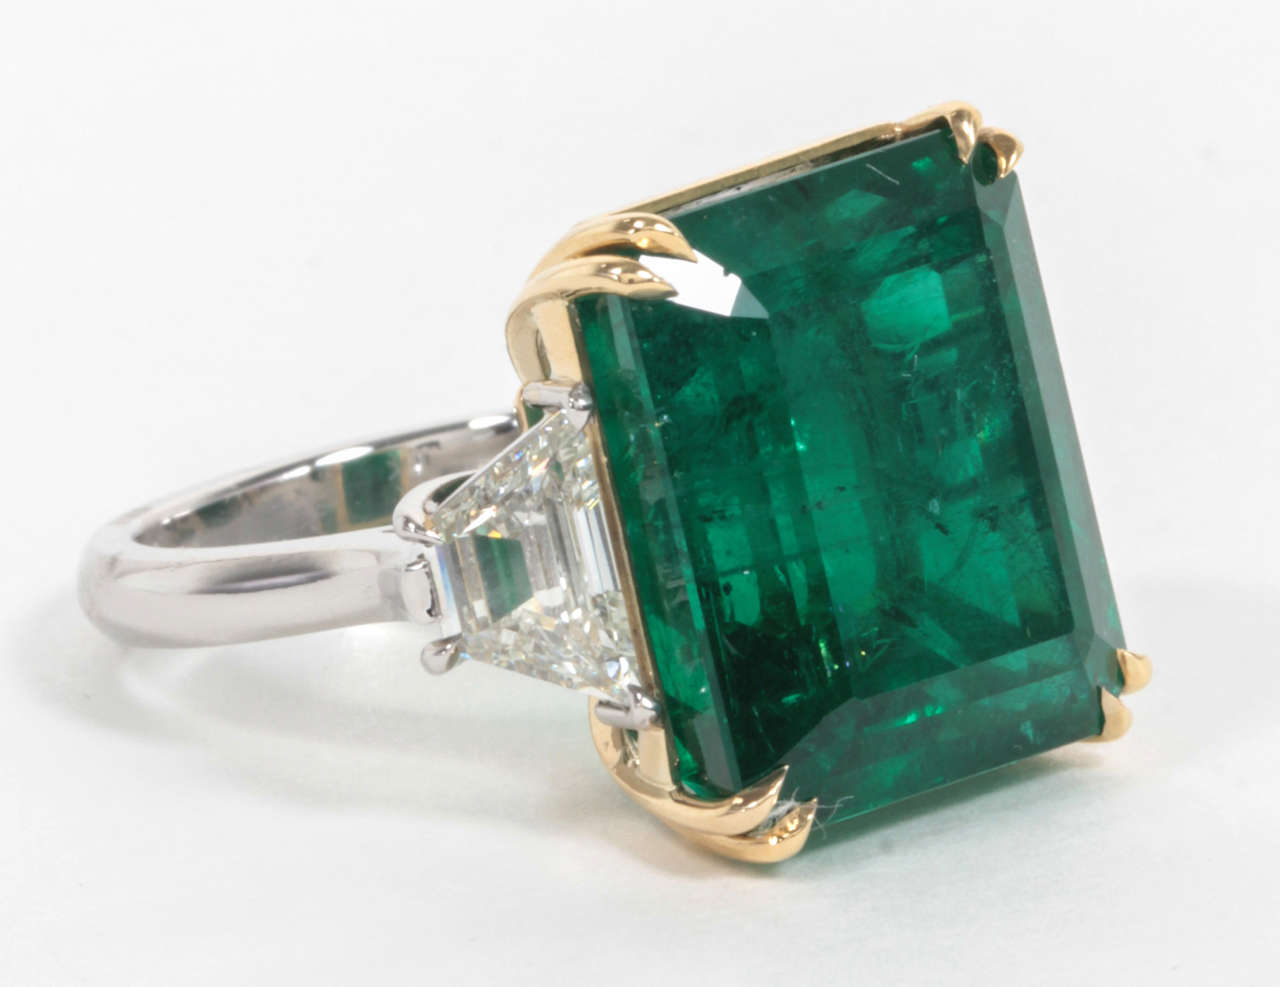 Important 20.89 carat emerald cut natural emerald set in a custom, handmade 18k and platinum mounting. 

1.51 carats of side diamonds.